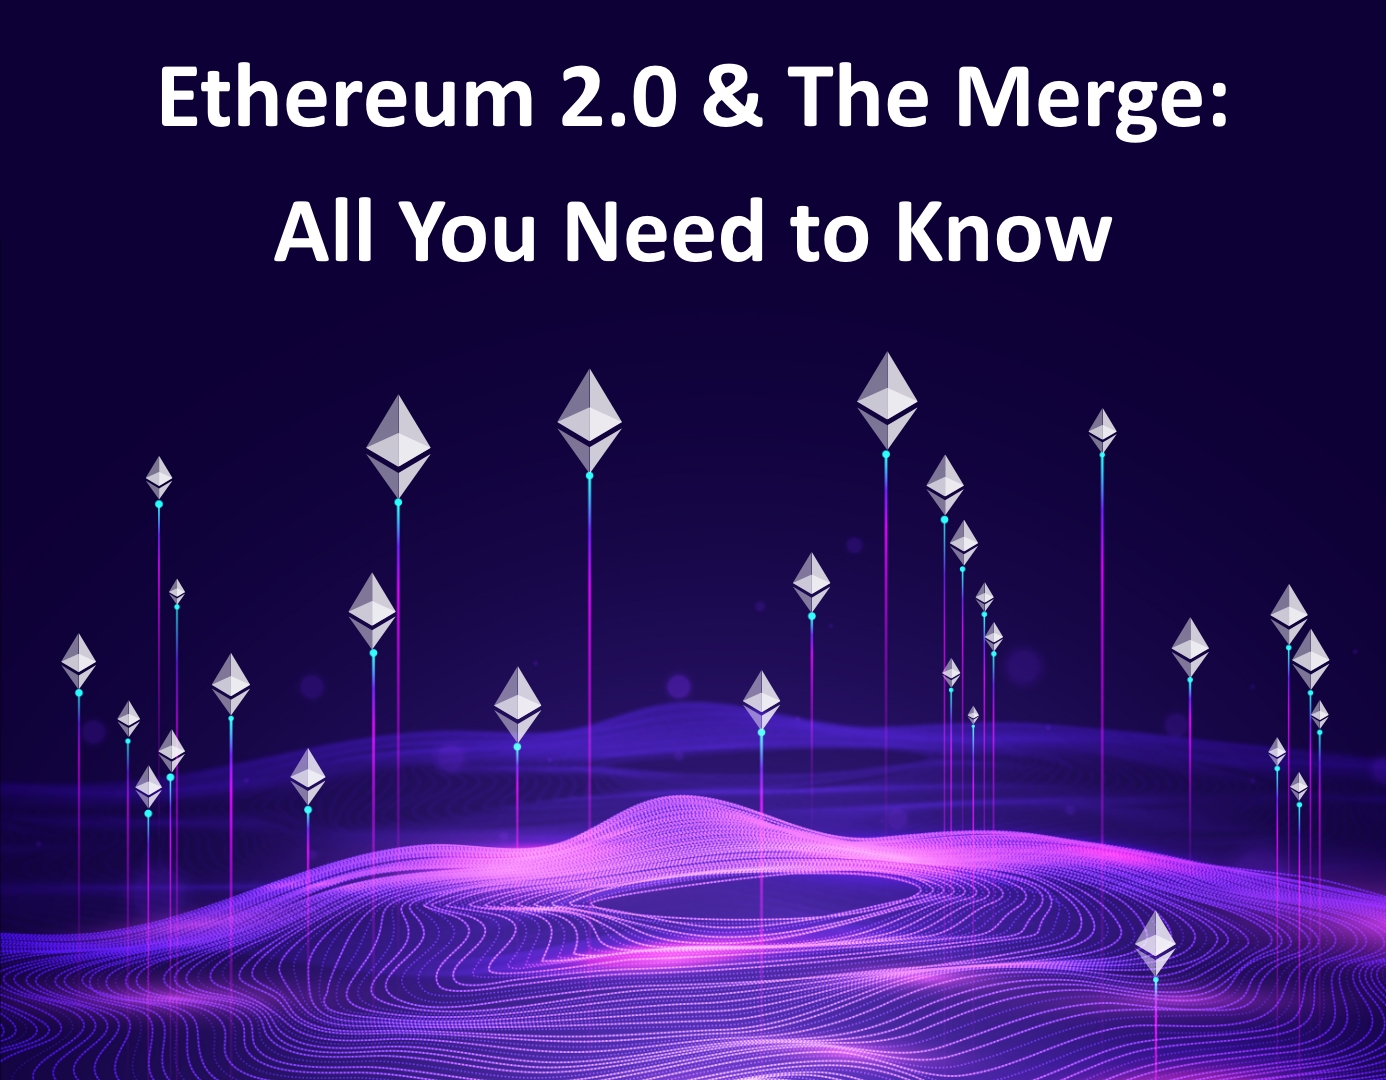 Ethereum 2.0 & The Merge: All You Need to Know